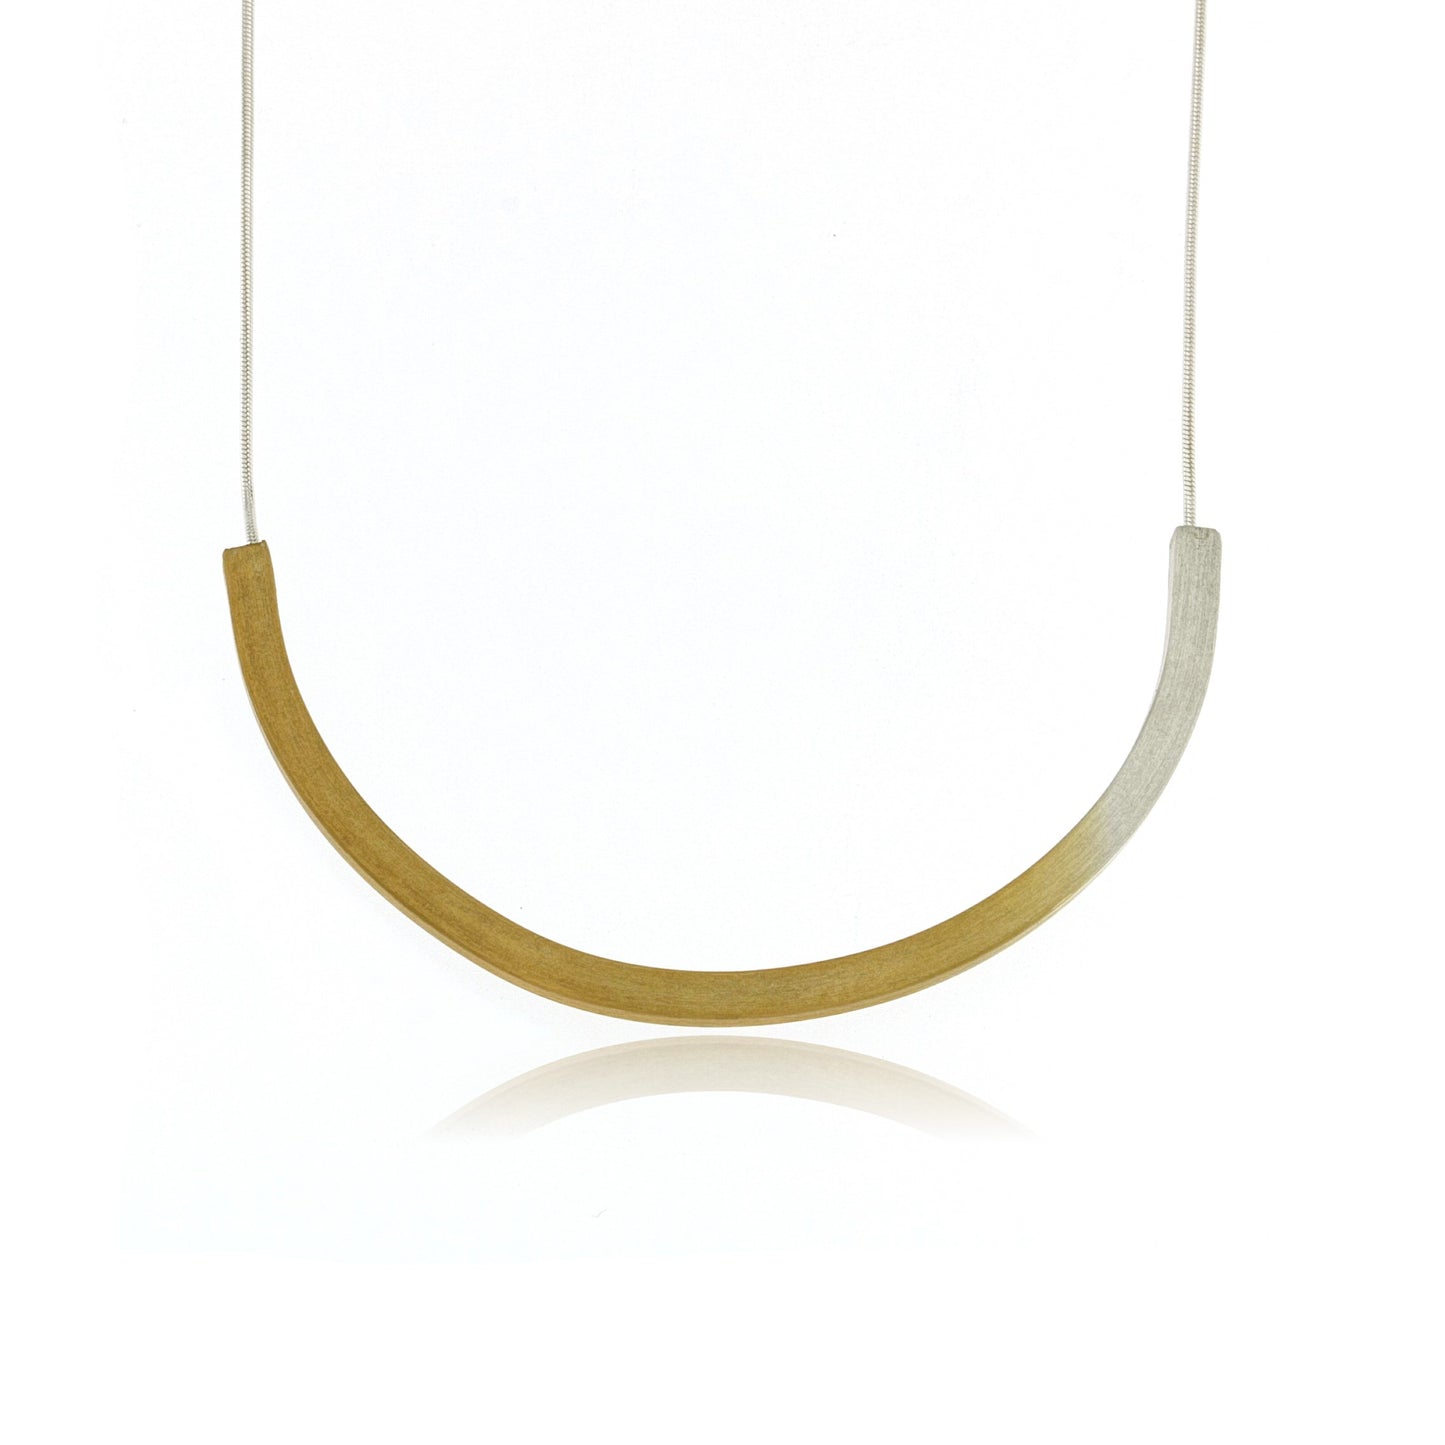 Mysterium Collection "Shaded Curve" Pendant